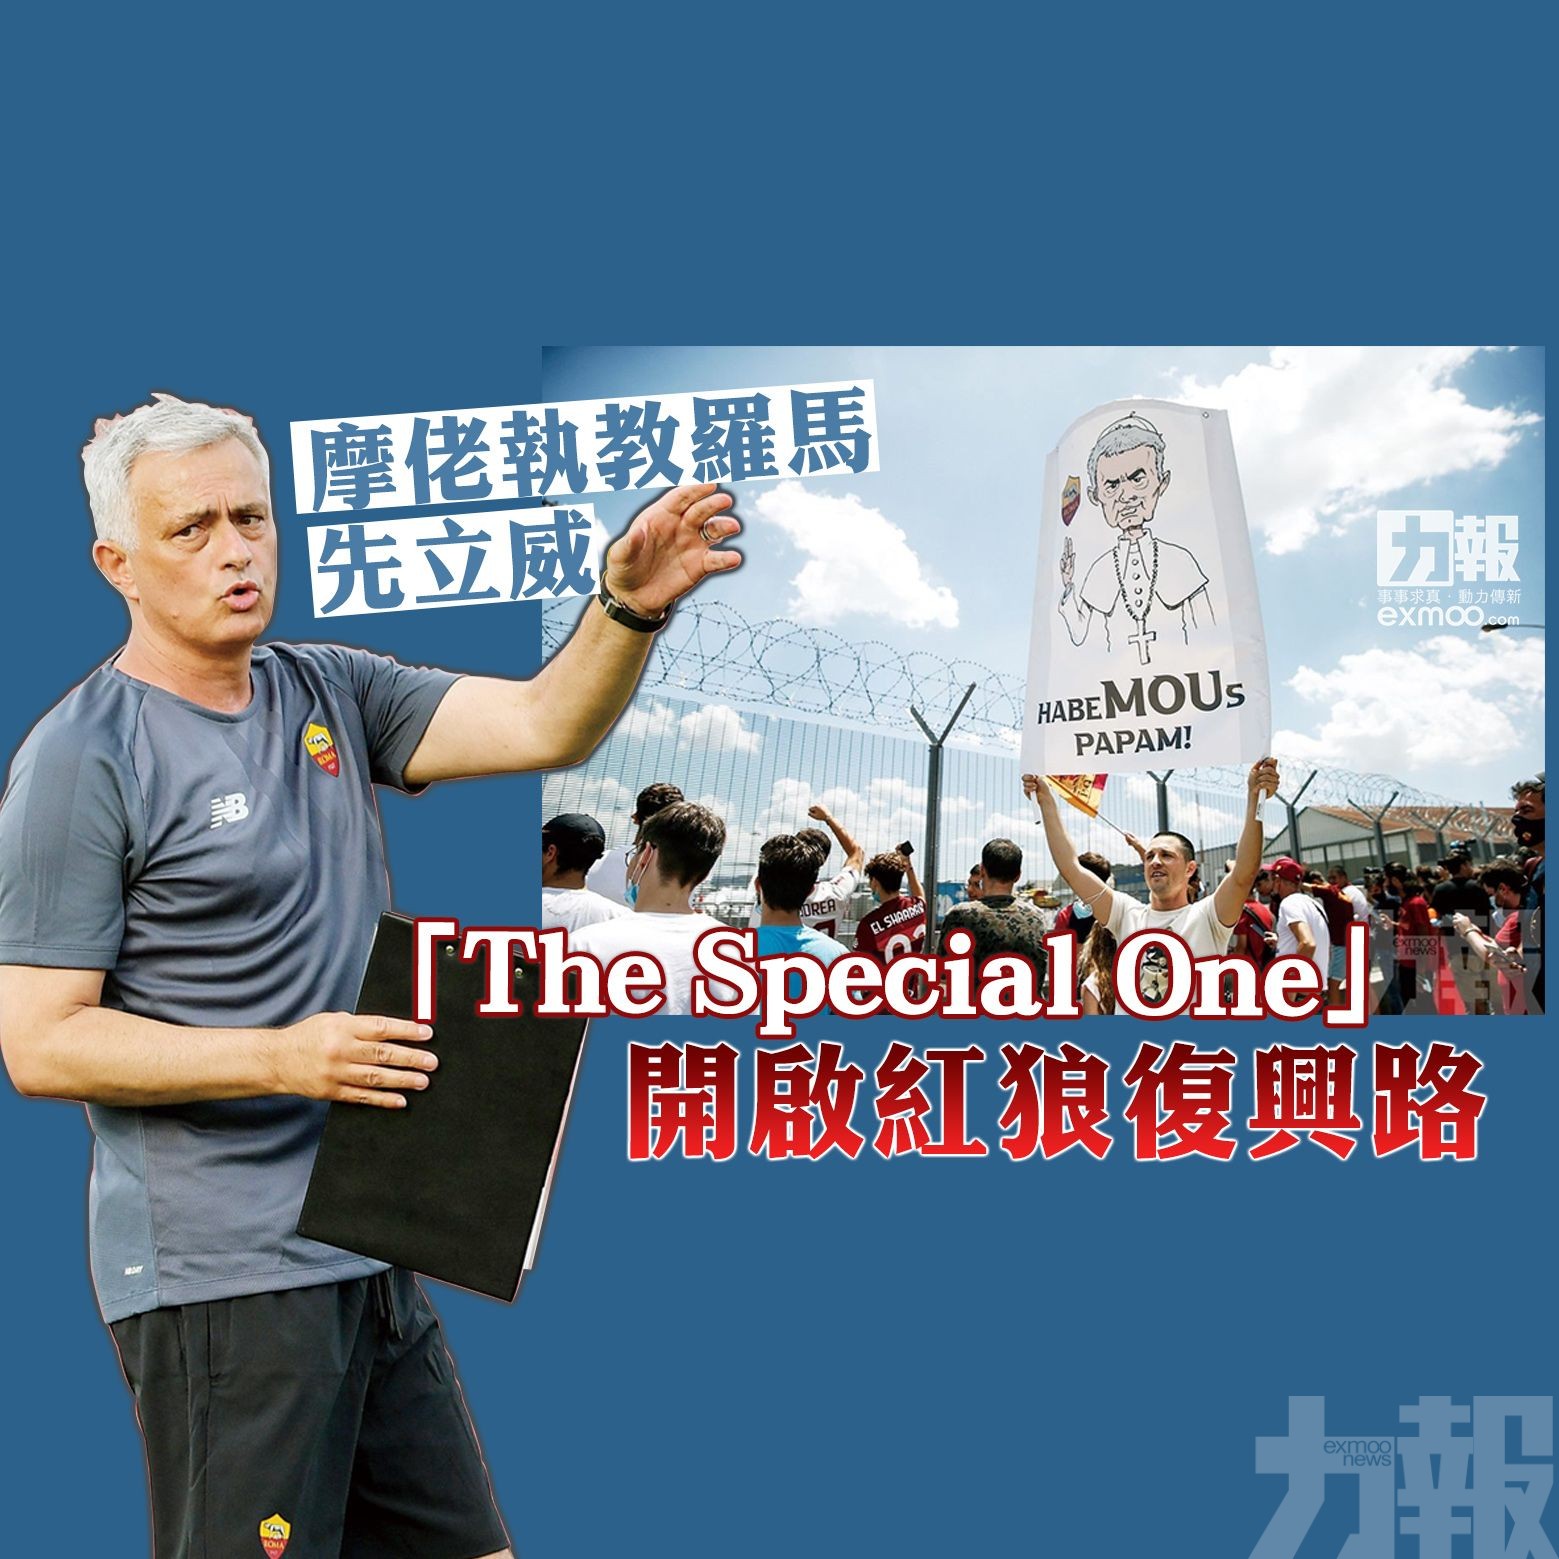 「The Special One」開啟紅狼復興路